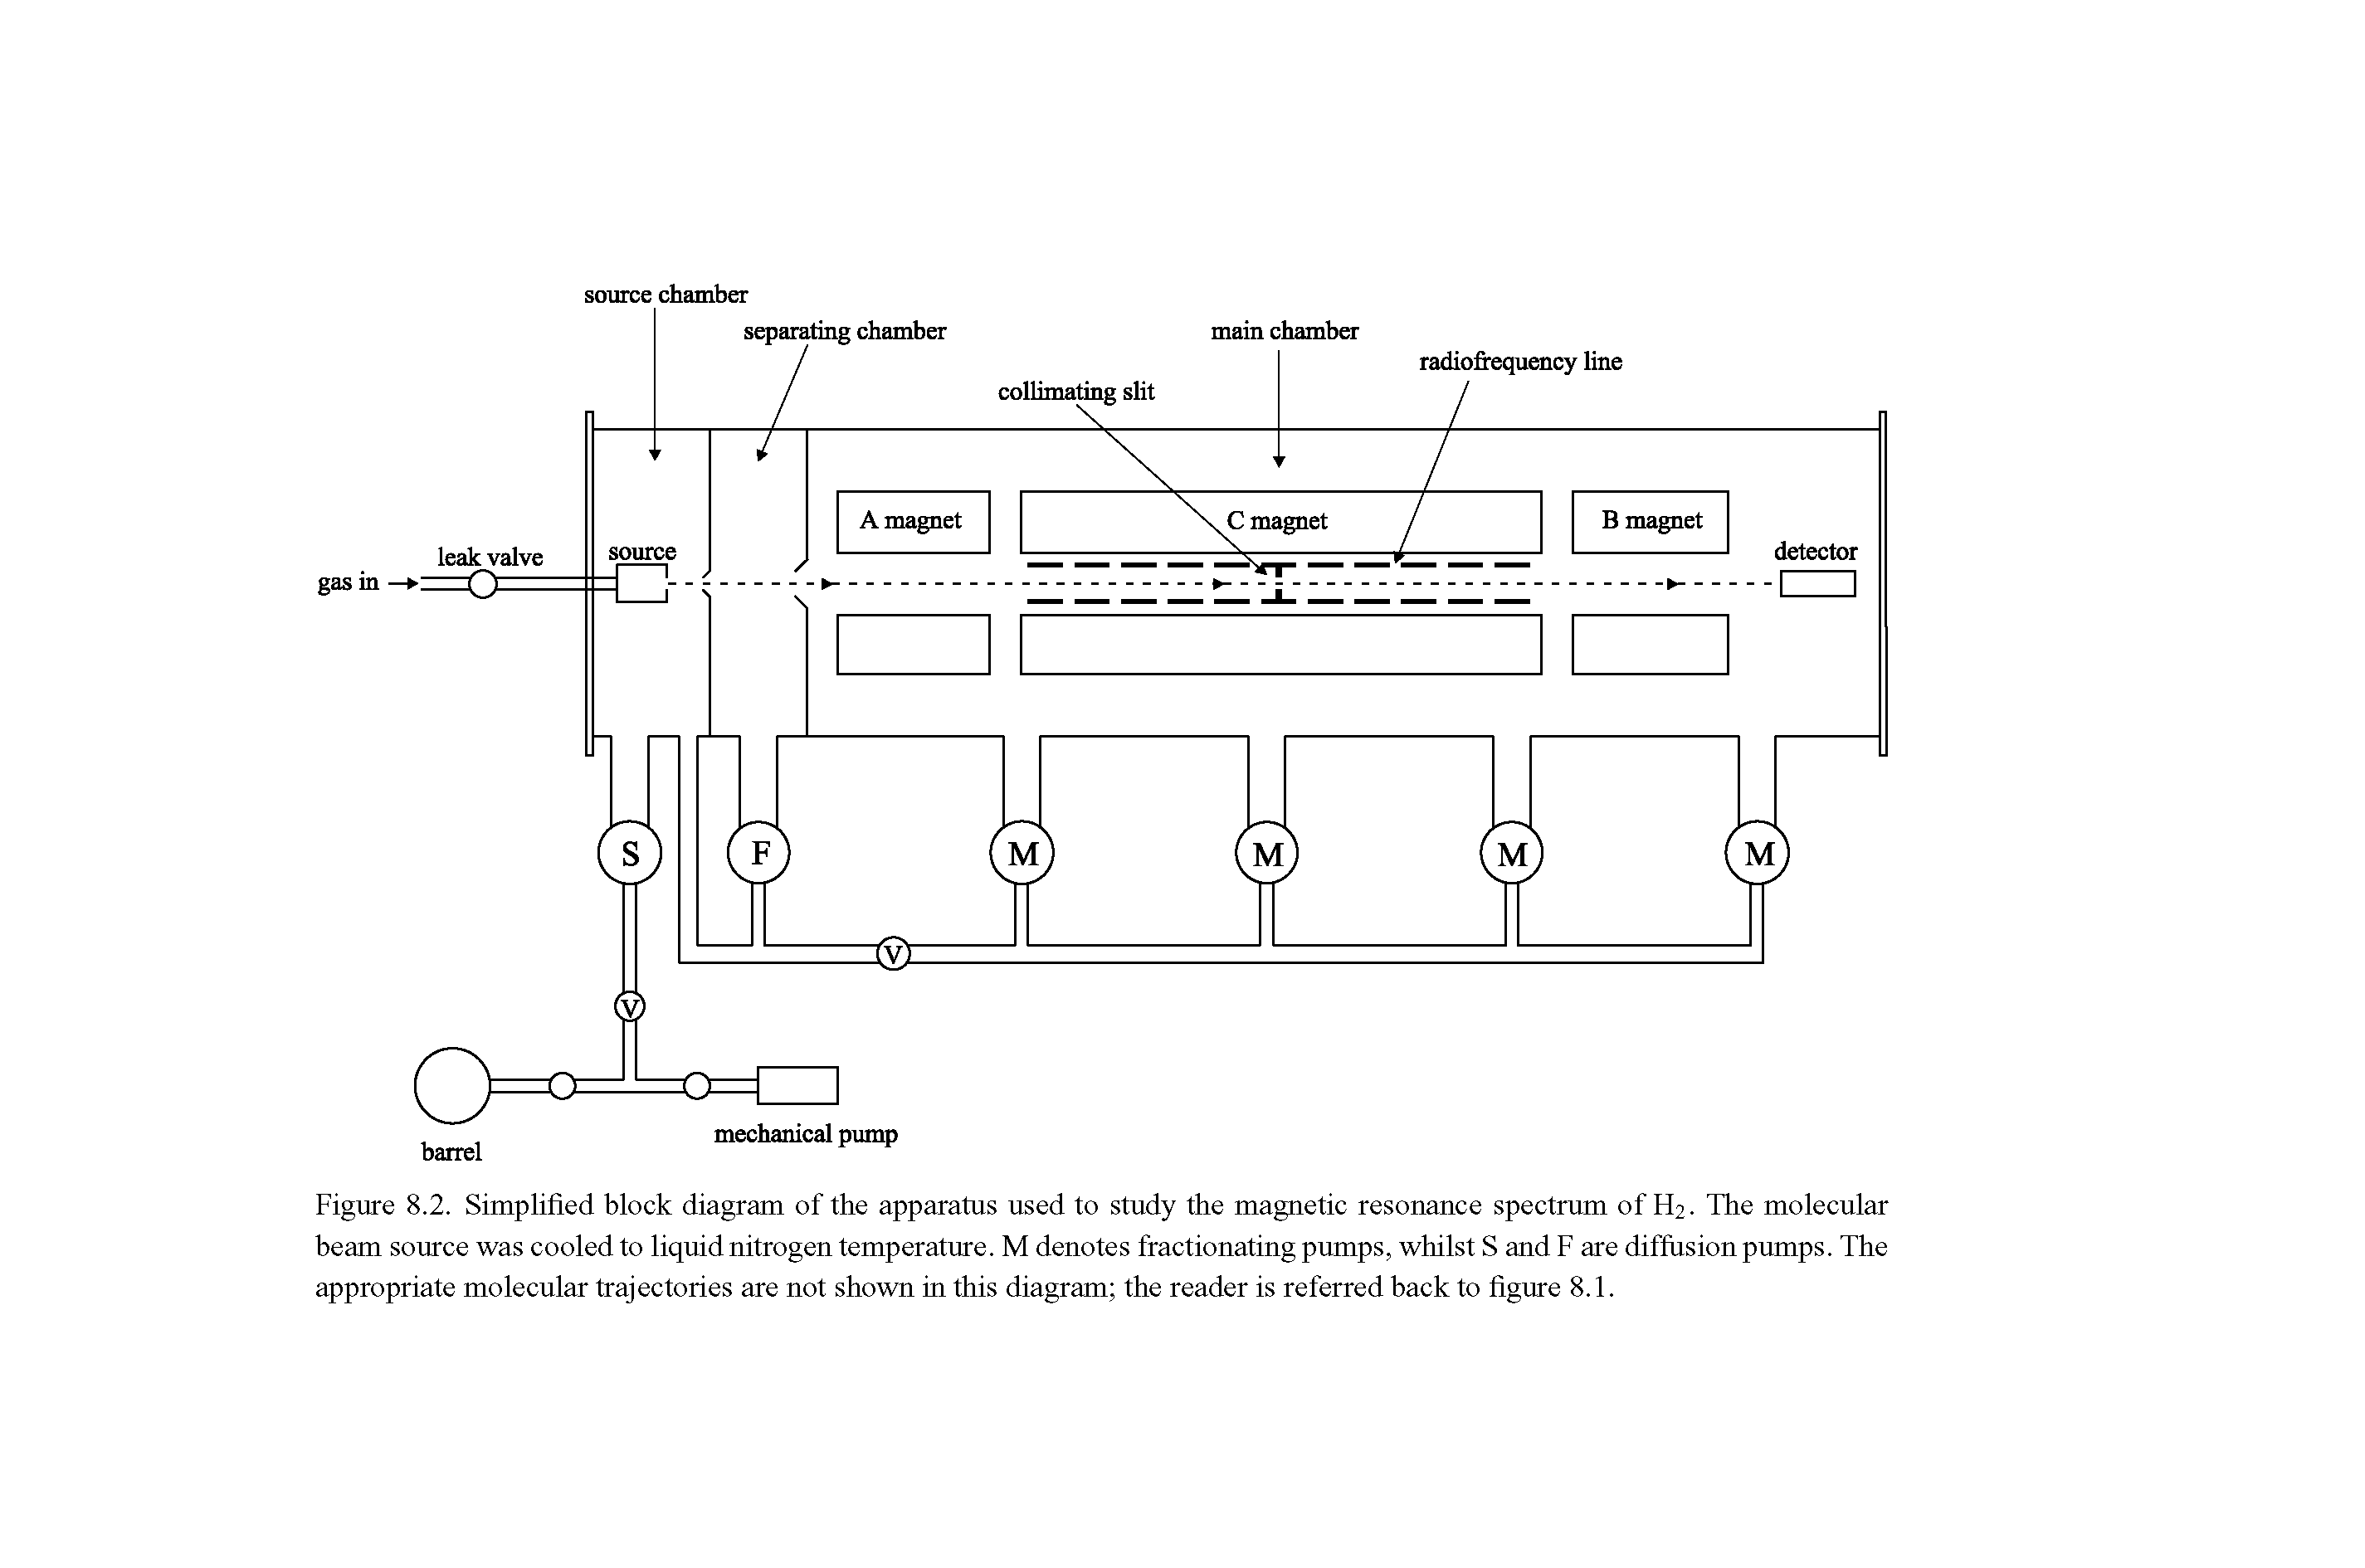 Figure 8.2. Simplified block diagram of the apparatus used to study the magnetic resonance spectrum of H2. The molecular beam source was cooled to liquid nitrogen temperature. M denotes fractionating pumps, whilst S and F are diffusion pumps. The appropriate molecular trajectories are not shown in this diagram the reader is referred back to figure 8.1.